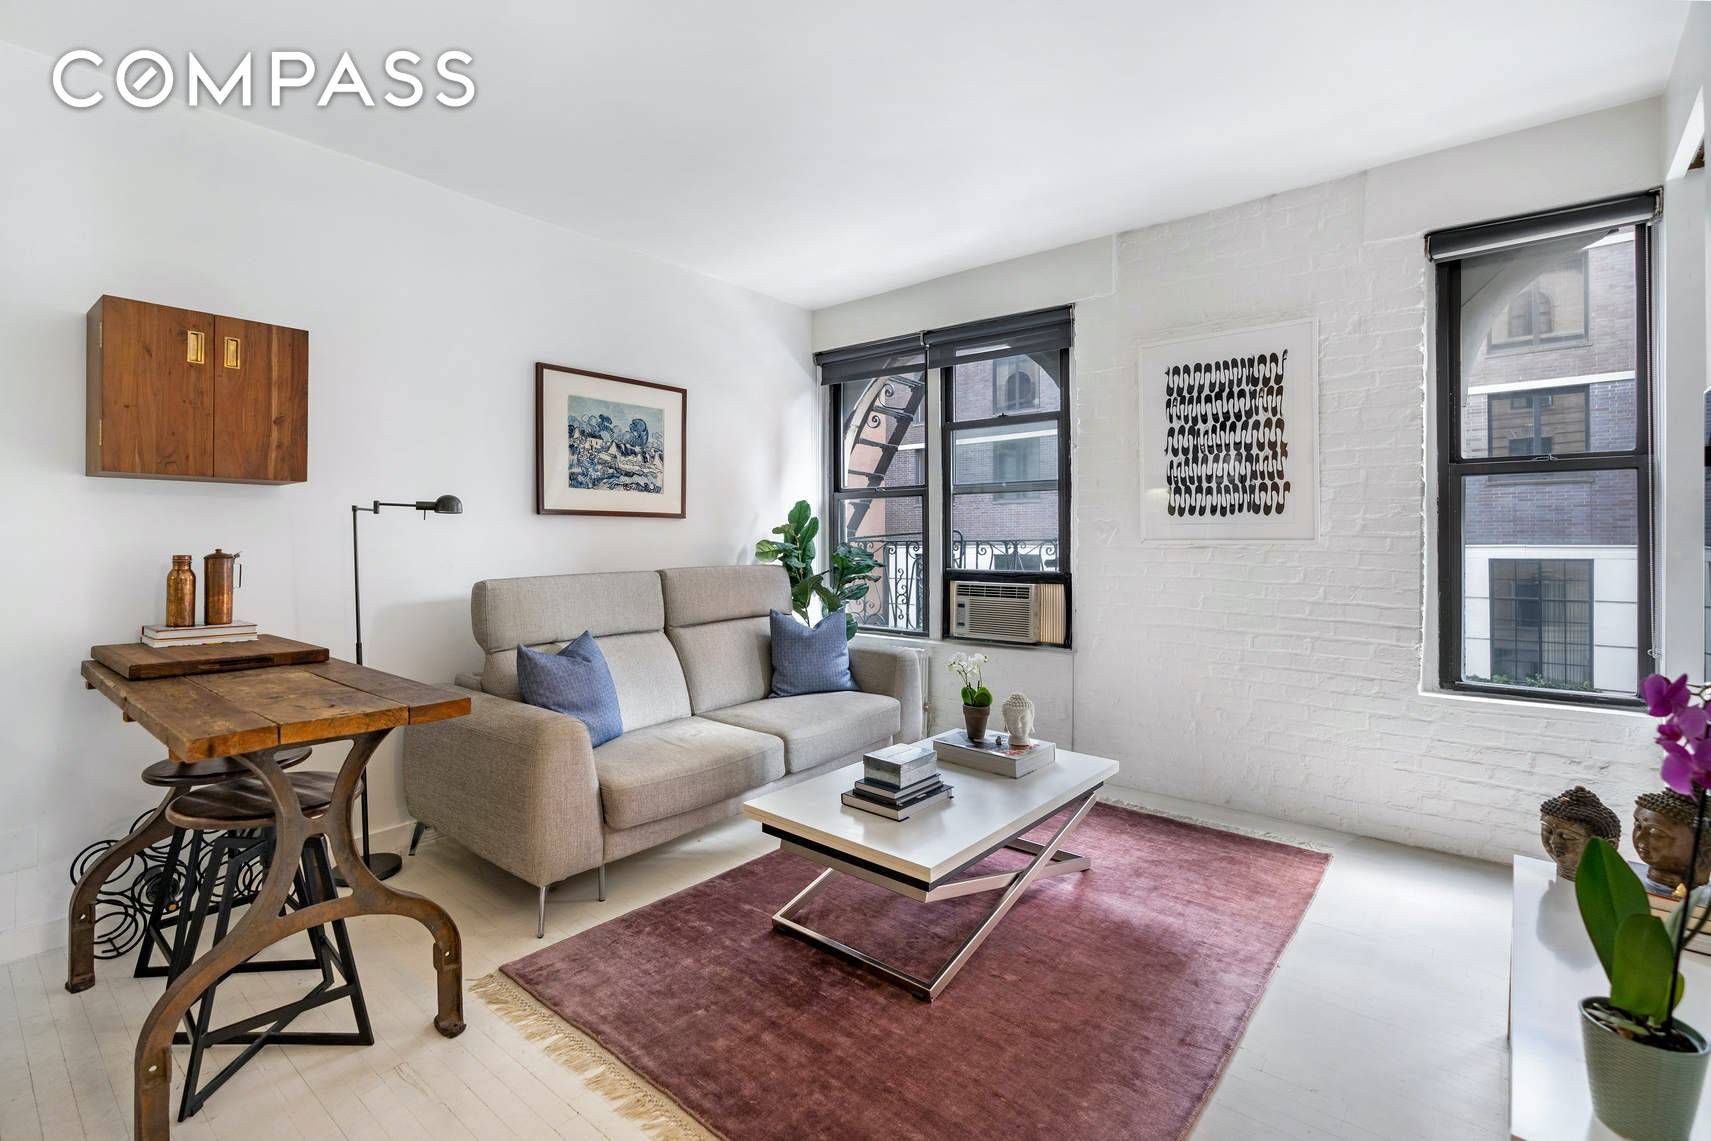 Live your fantasy in this sophisticated and meticulously renovated one bedroom home in the heart of SoHo.